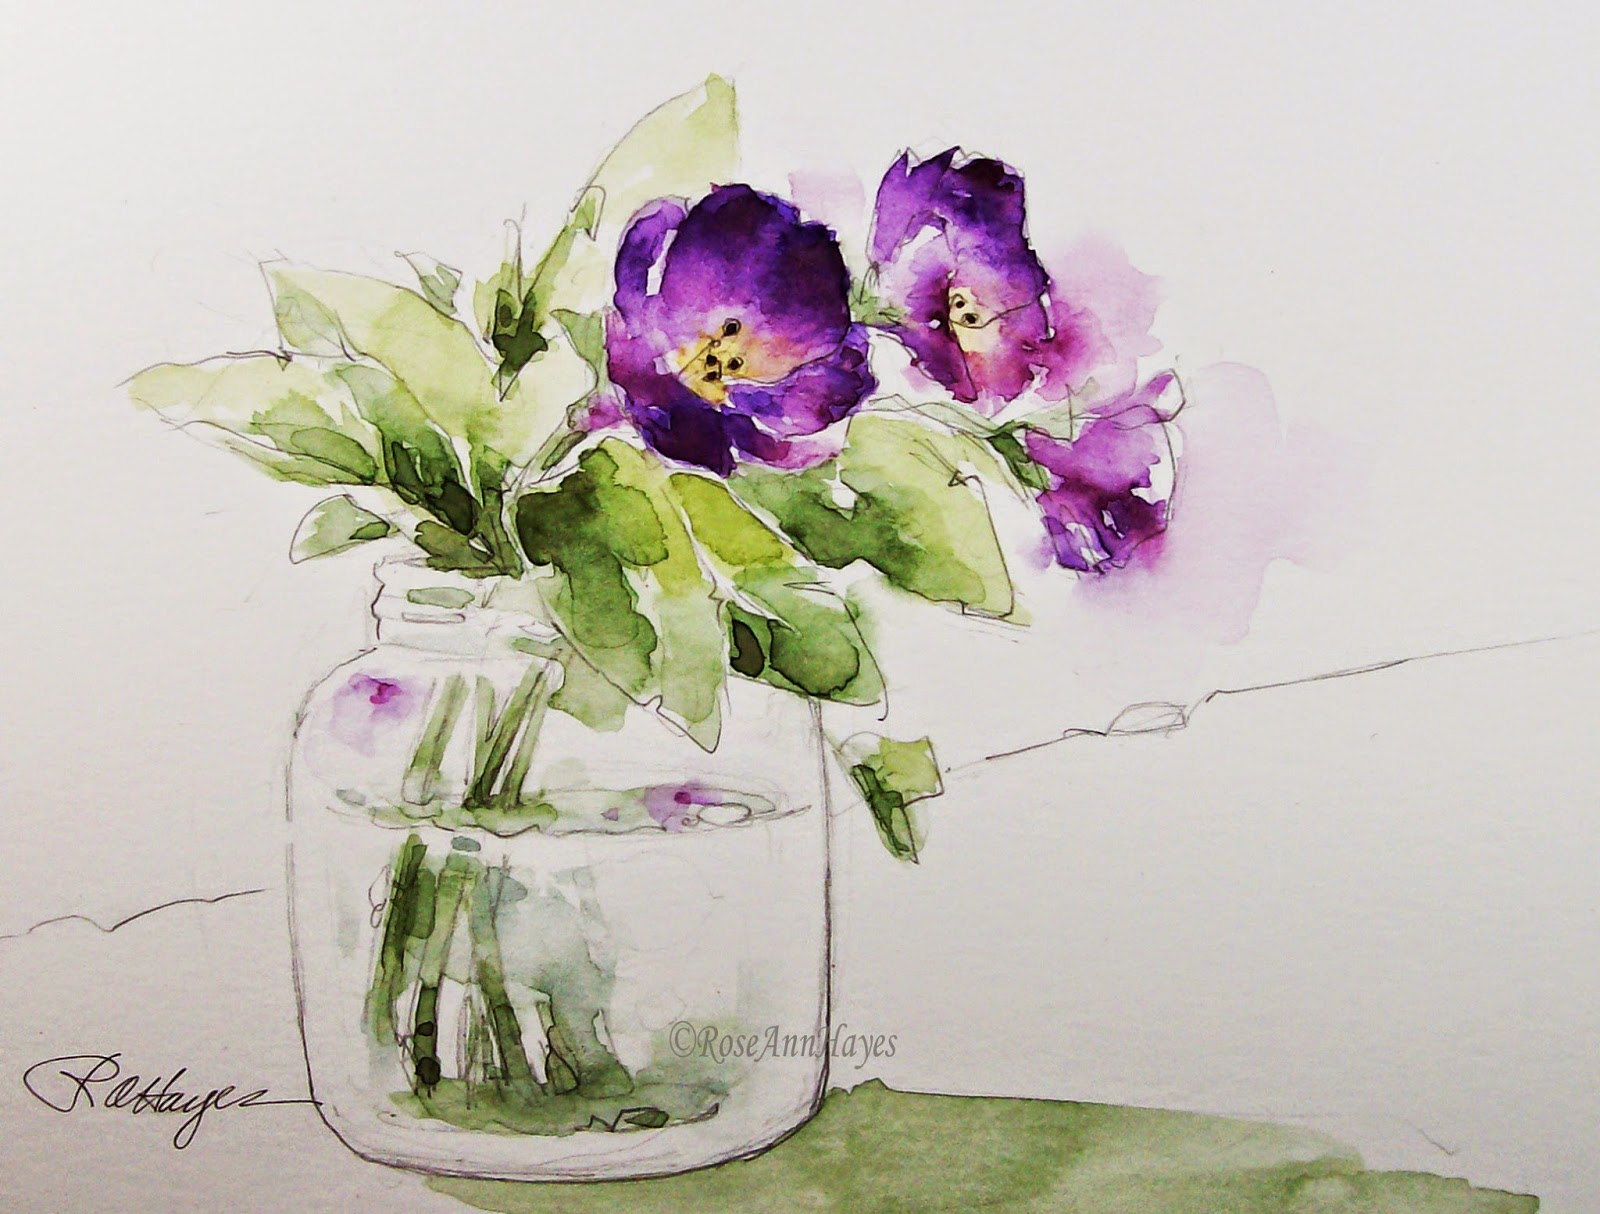 Watercolor Painting Ideas Flowers at PaintingValley.com | Explore